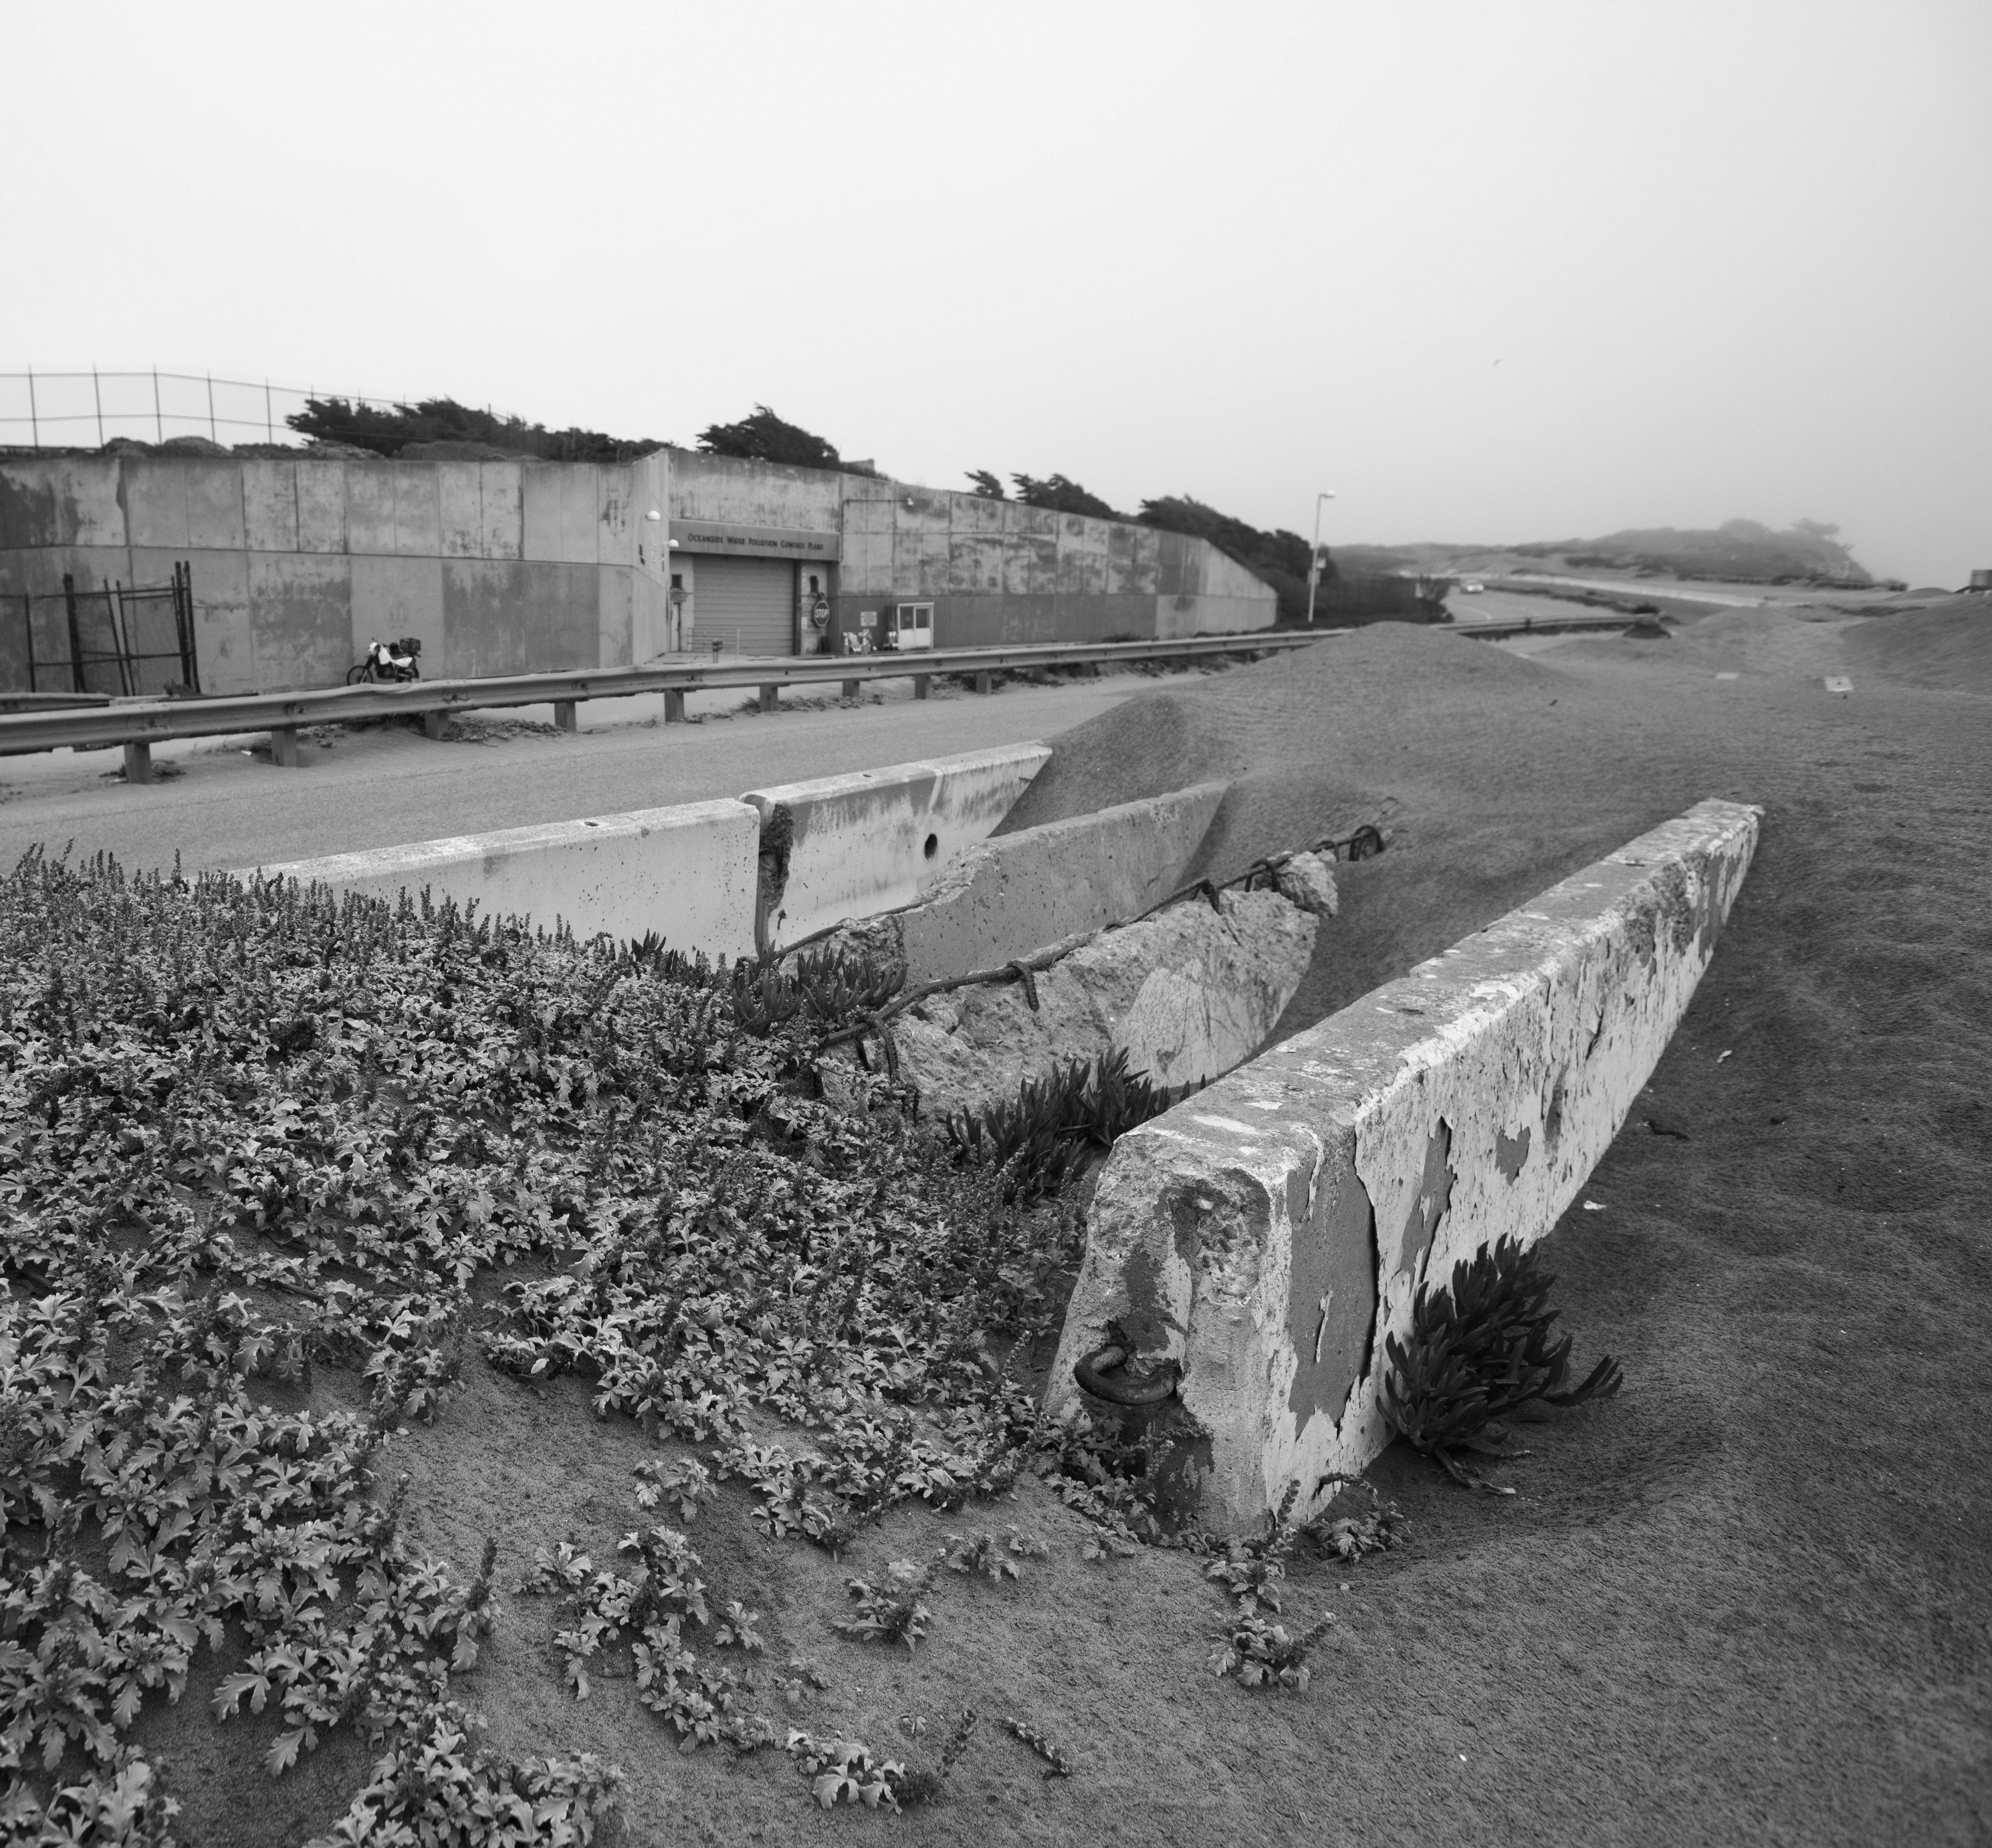 The image shows an overgrown, abandoned area with concrete barriers and structures. The background includes a weathered wall, a fence, and a distant foggy landscape.